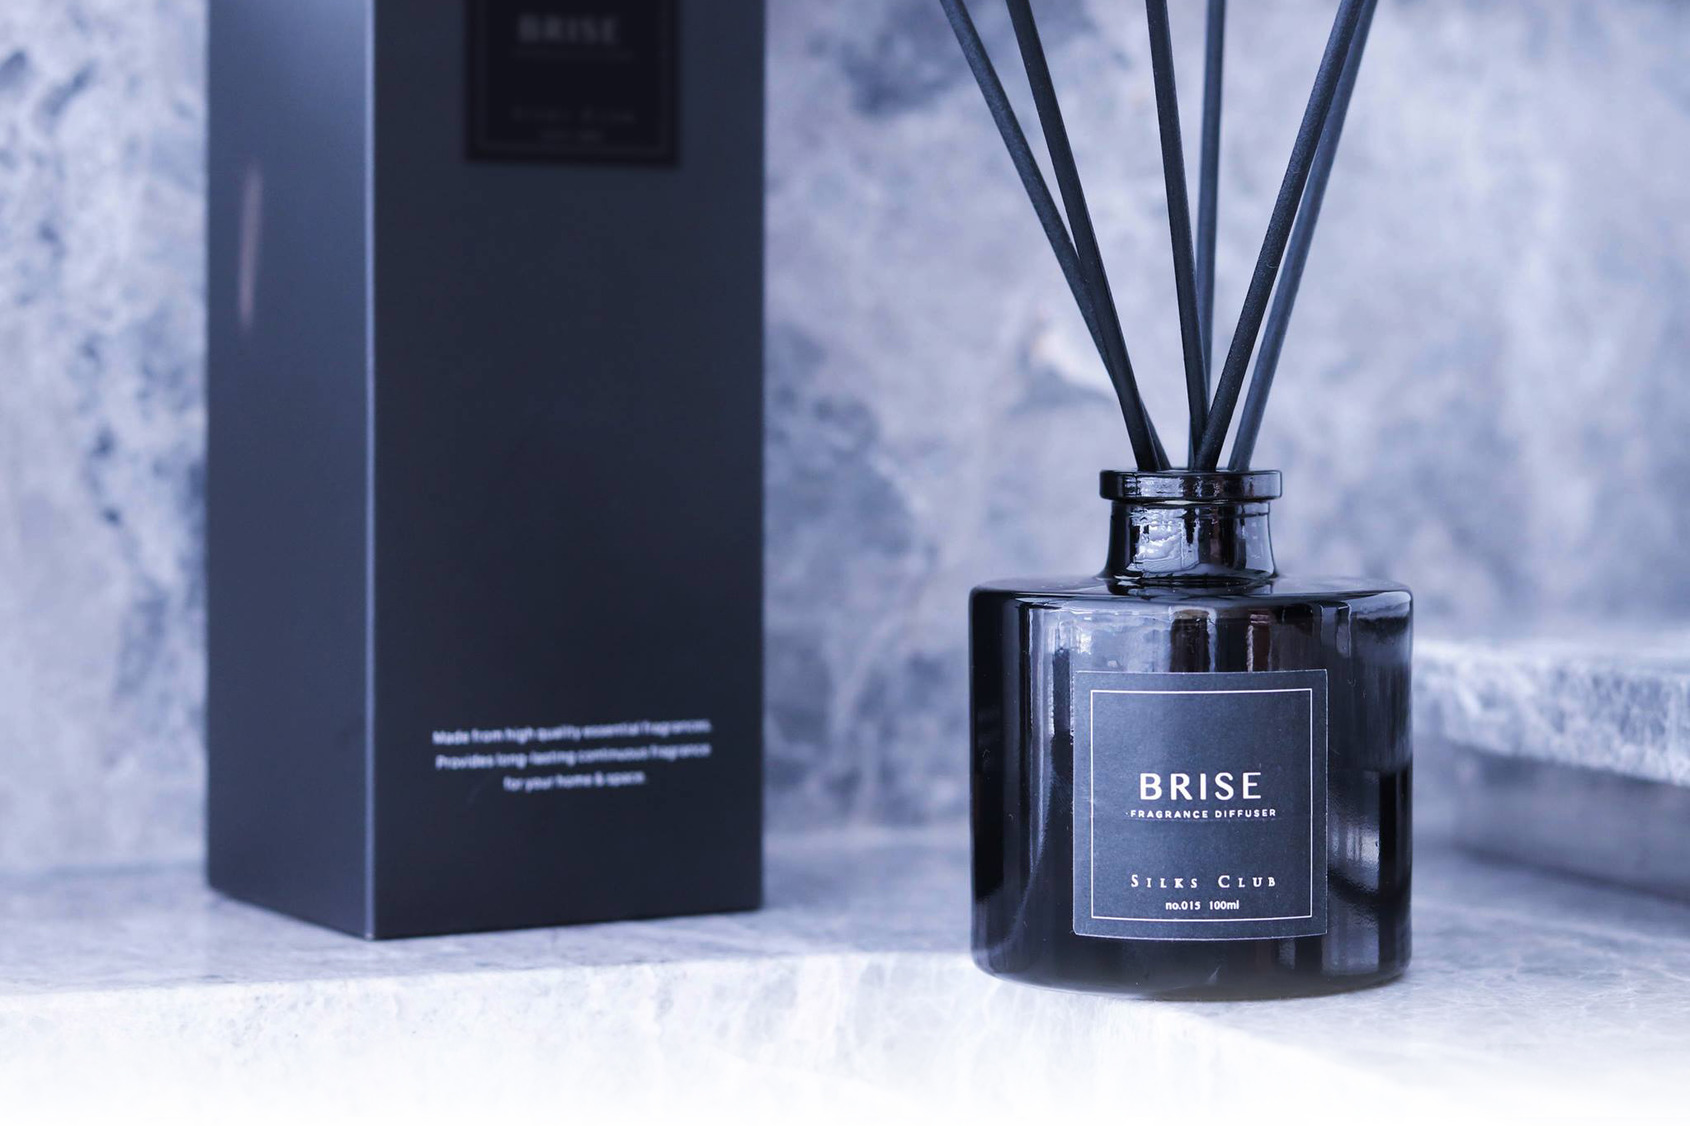 The Scent #111, and BRISE © Coutesy of the SILKS CLUB 